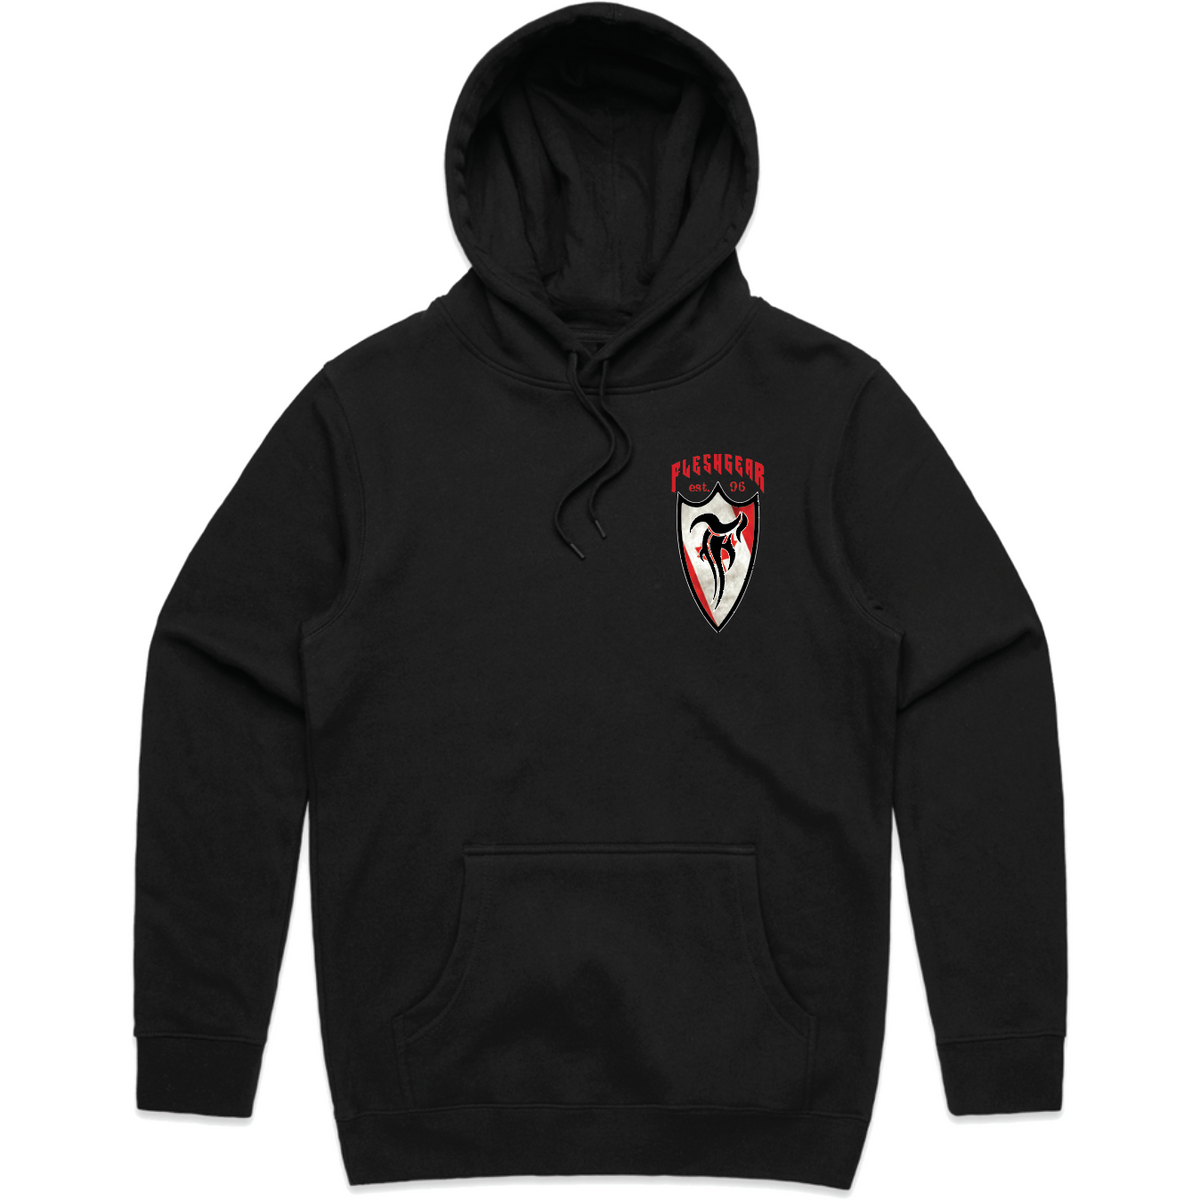 FLESHGEAR-Men's-Knit-Hooded-Pullover-Canadian-Shield - PULLOVER HOODIE - Synik Clothing - synikclothing.com